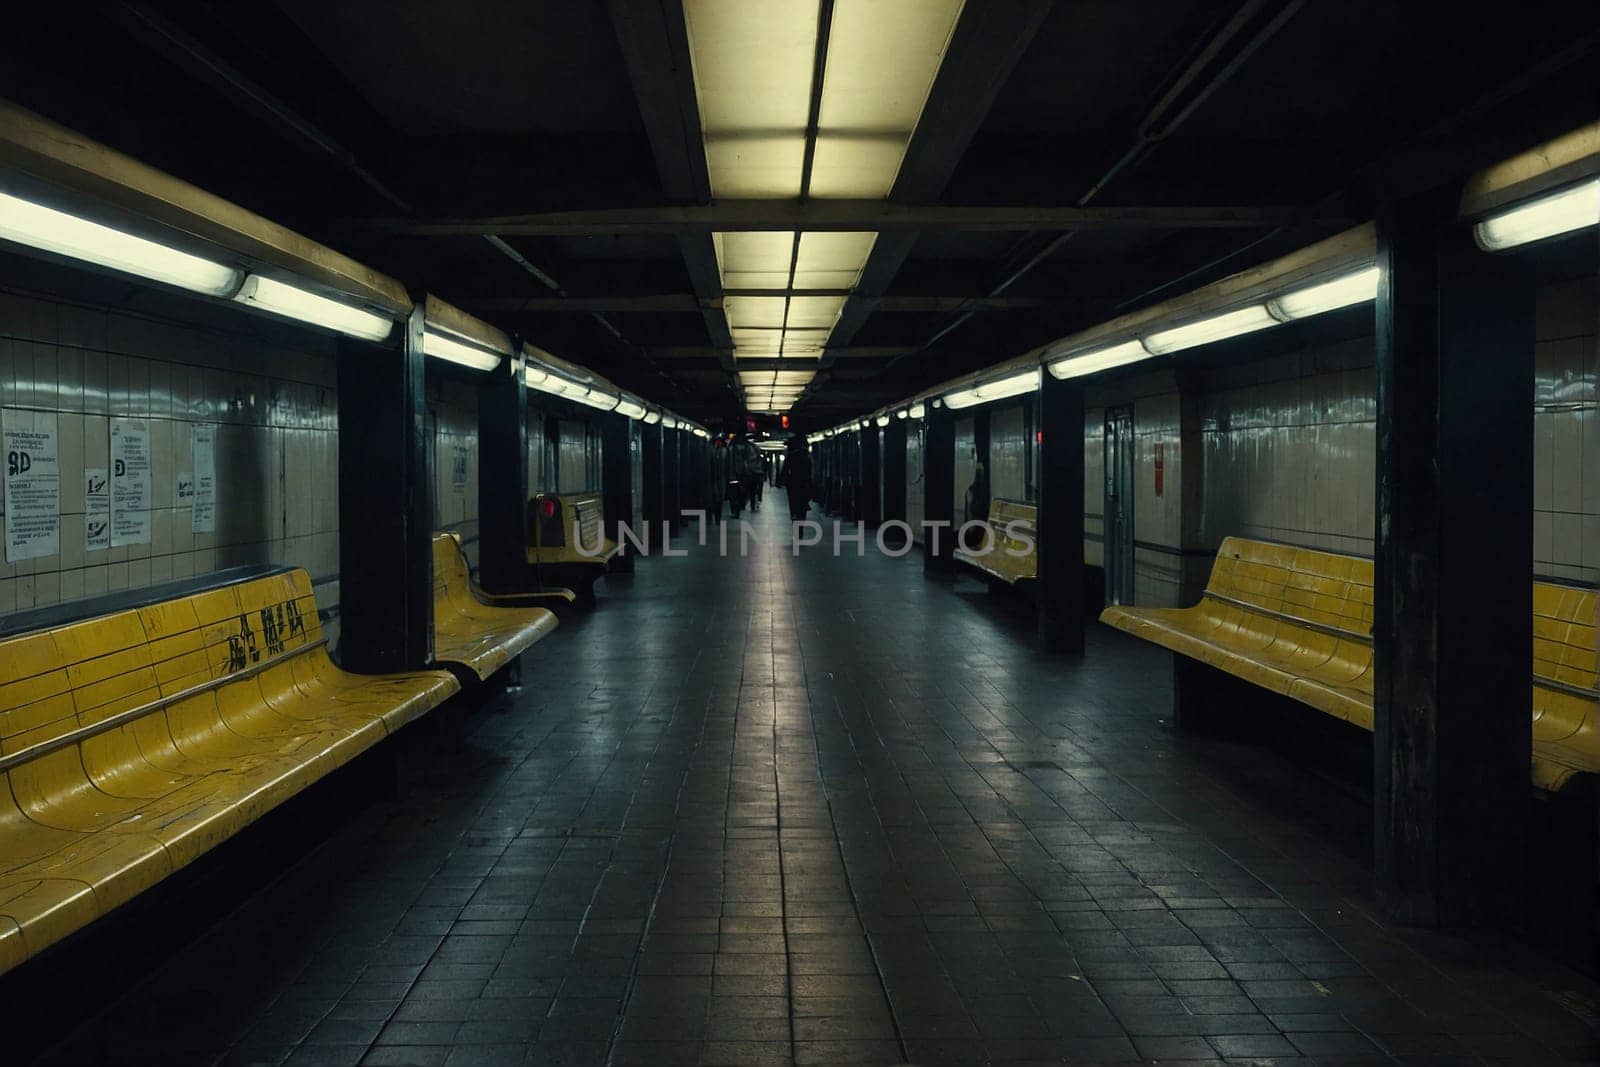 A photo capturing a subway station featuring yellow benches and a tiled floor.